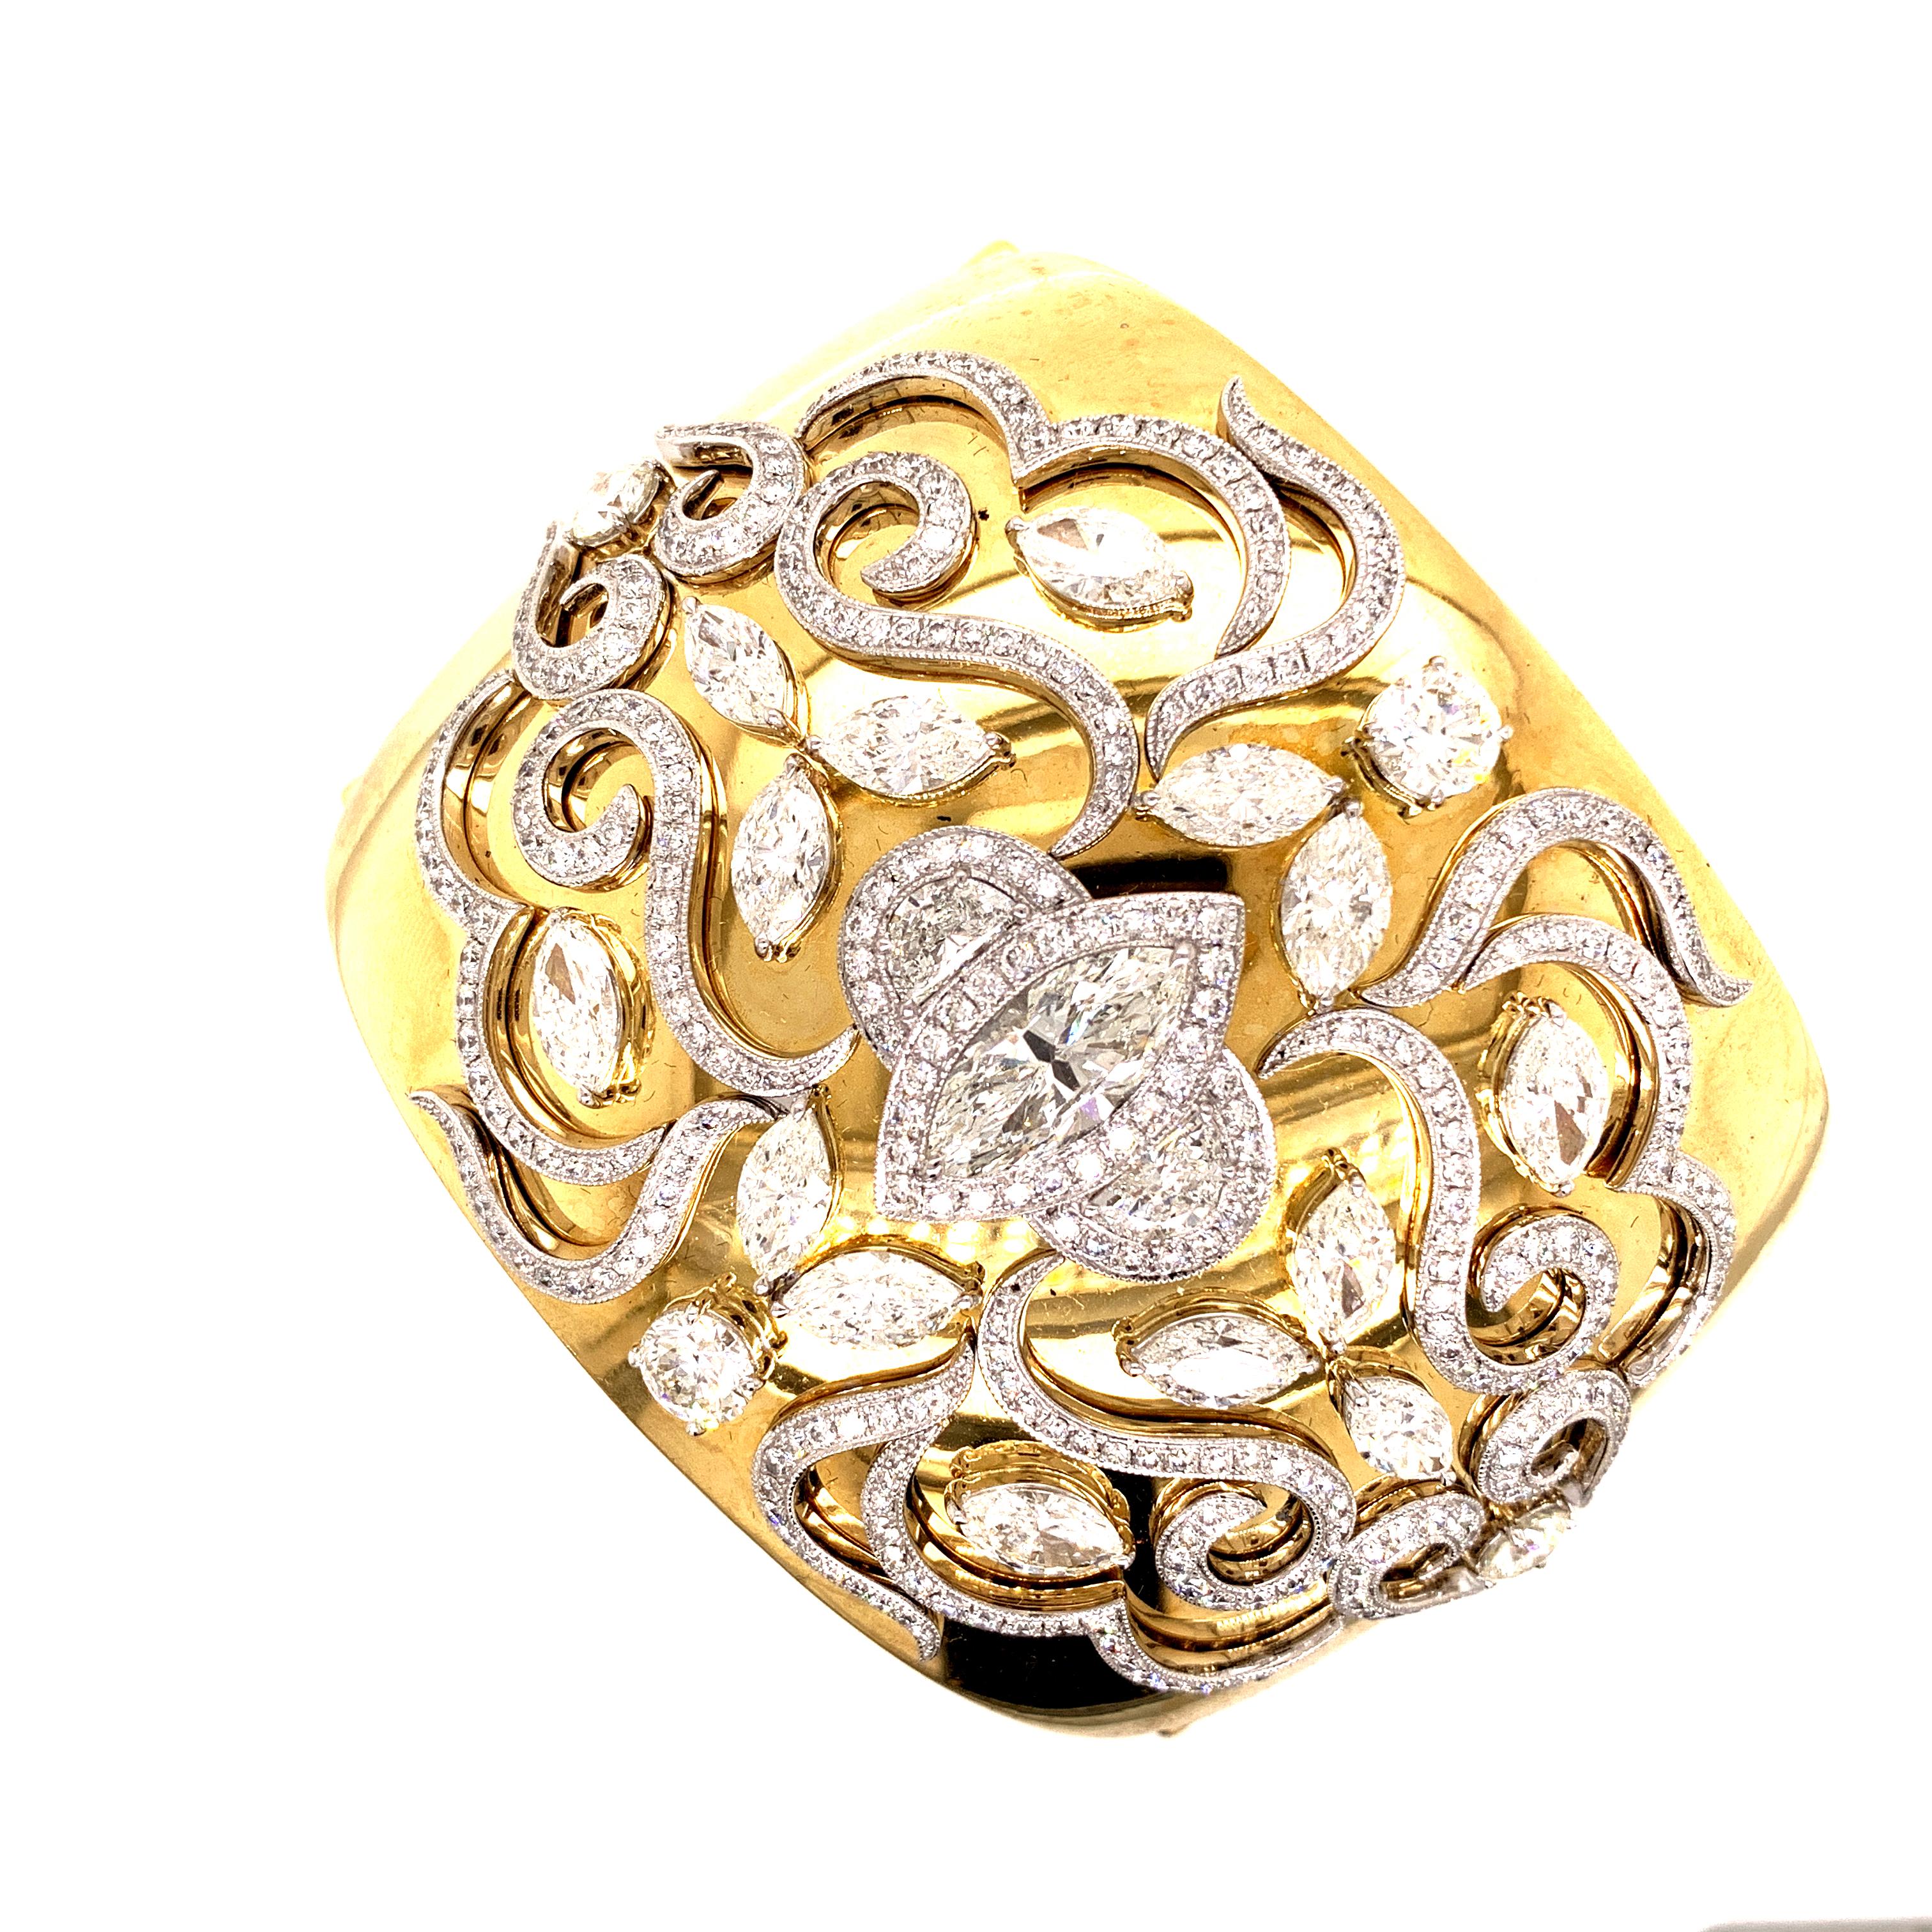 18K yellow gold bangle designed with small diamonds with the total weight of 4.18 carats along with marquise diamonds that weighs 10.15 carat and marquise center stone that weighs 2.20 carat.

Sophia D by Joseph Dardashti LTD has been known